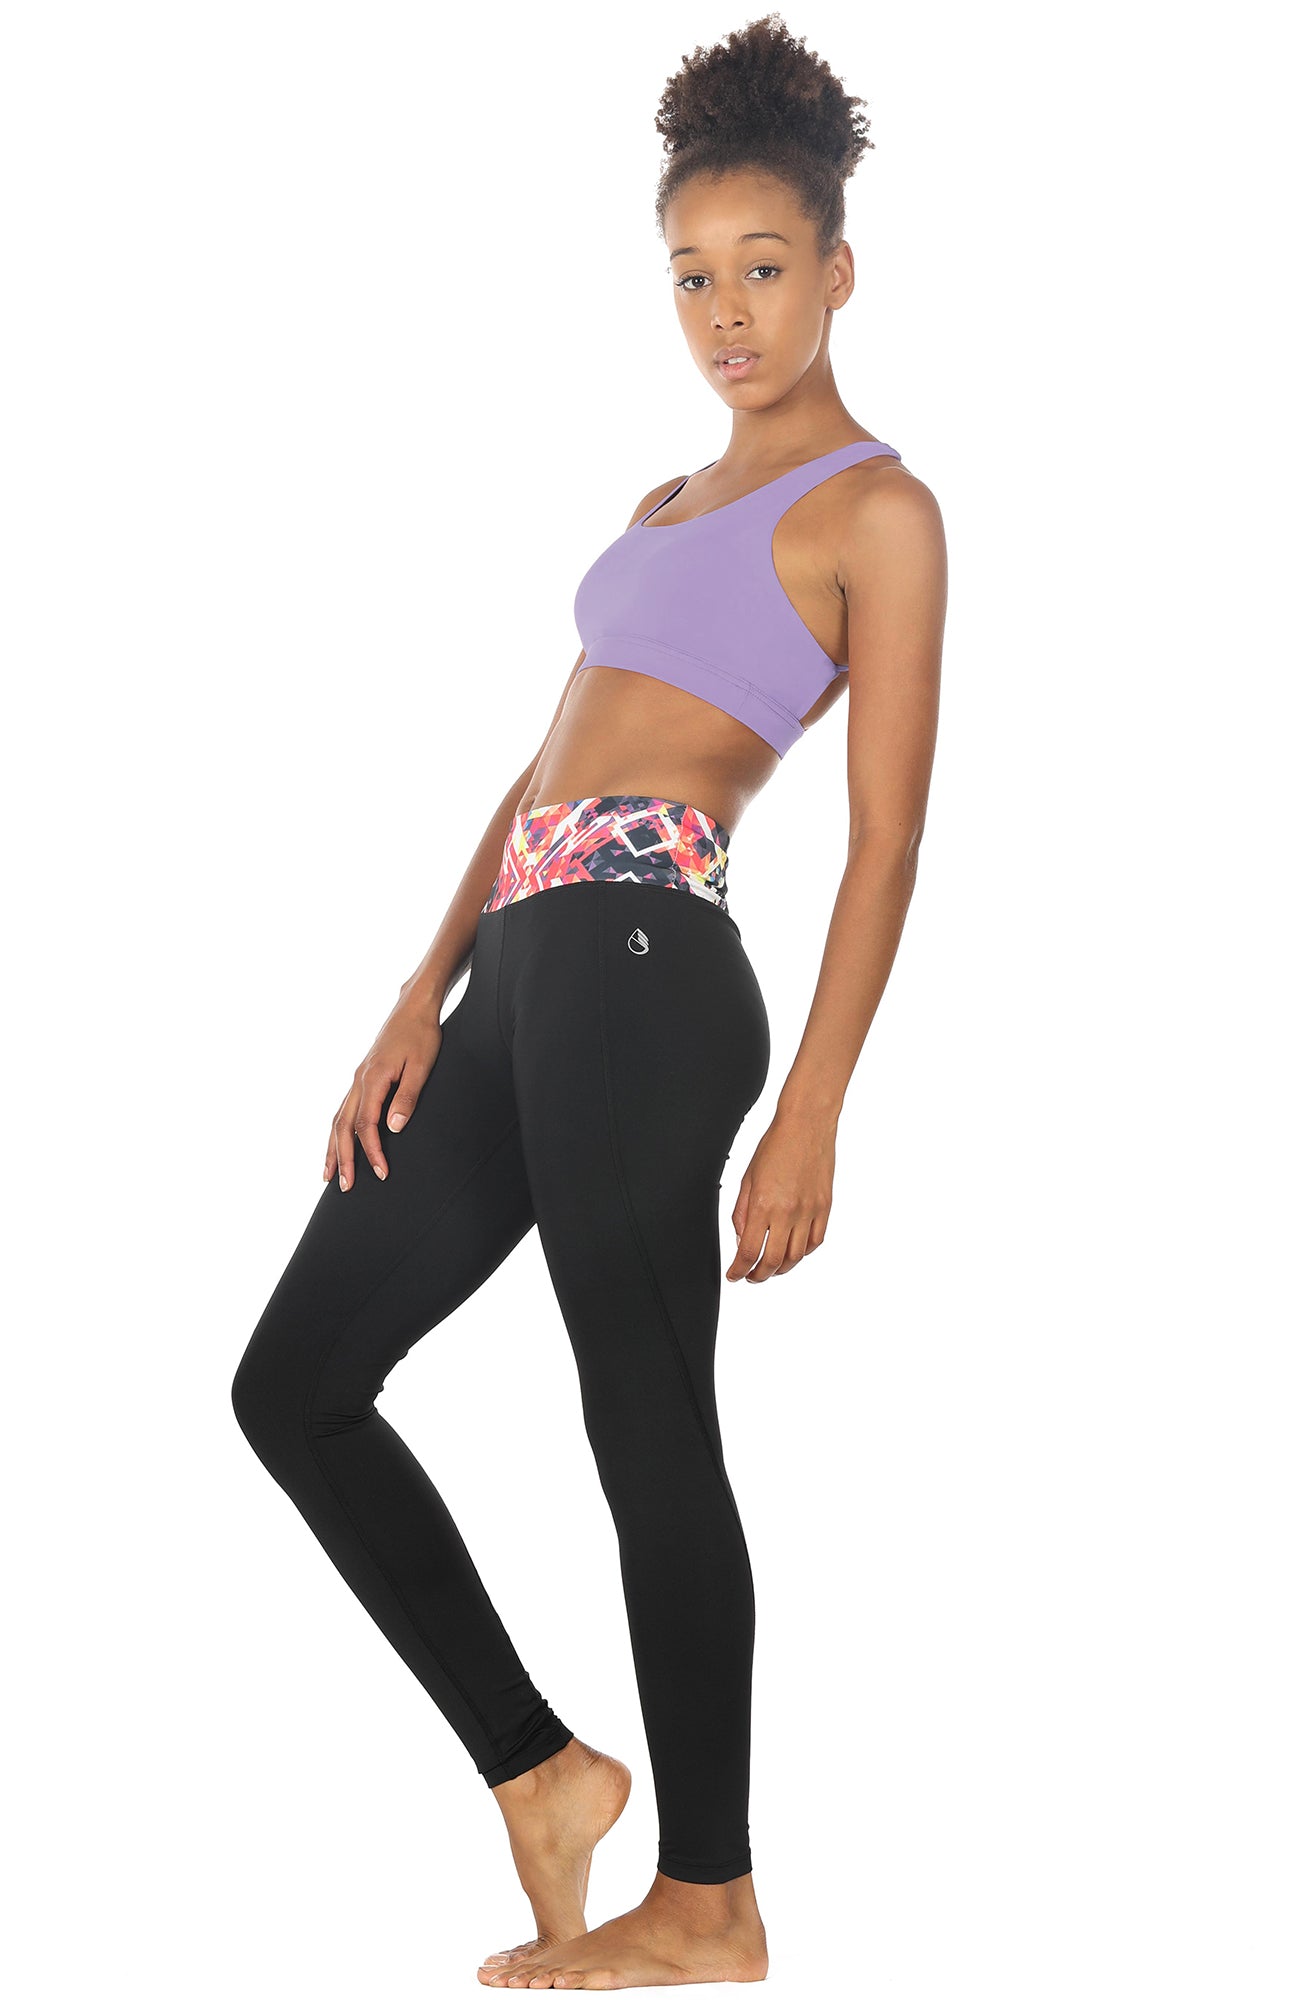 Padded Strappy Sports Bras for Women - Activewear Tops for Yoga Running  Fitness,black grey,xx-large,F113779 